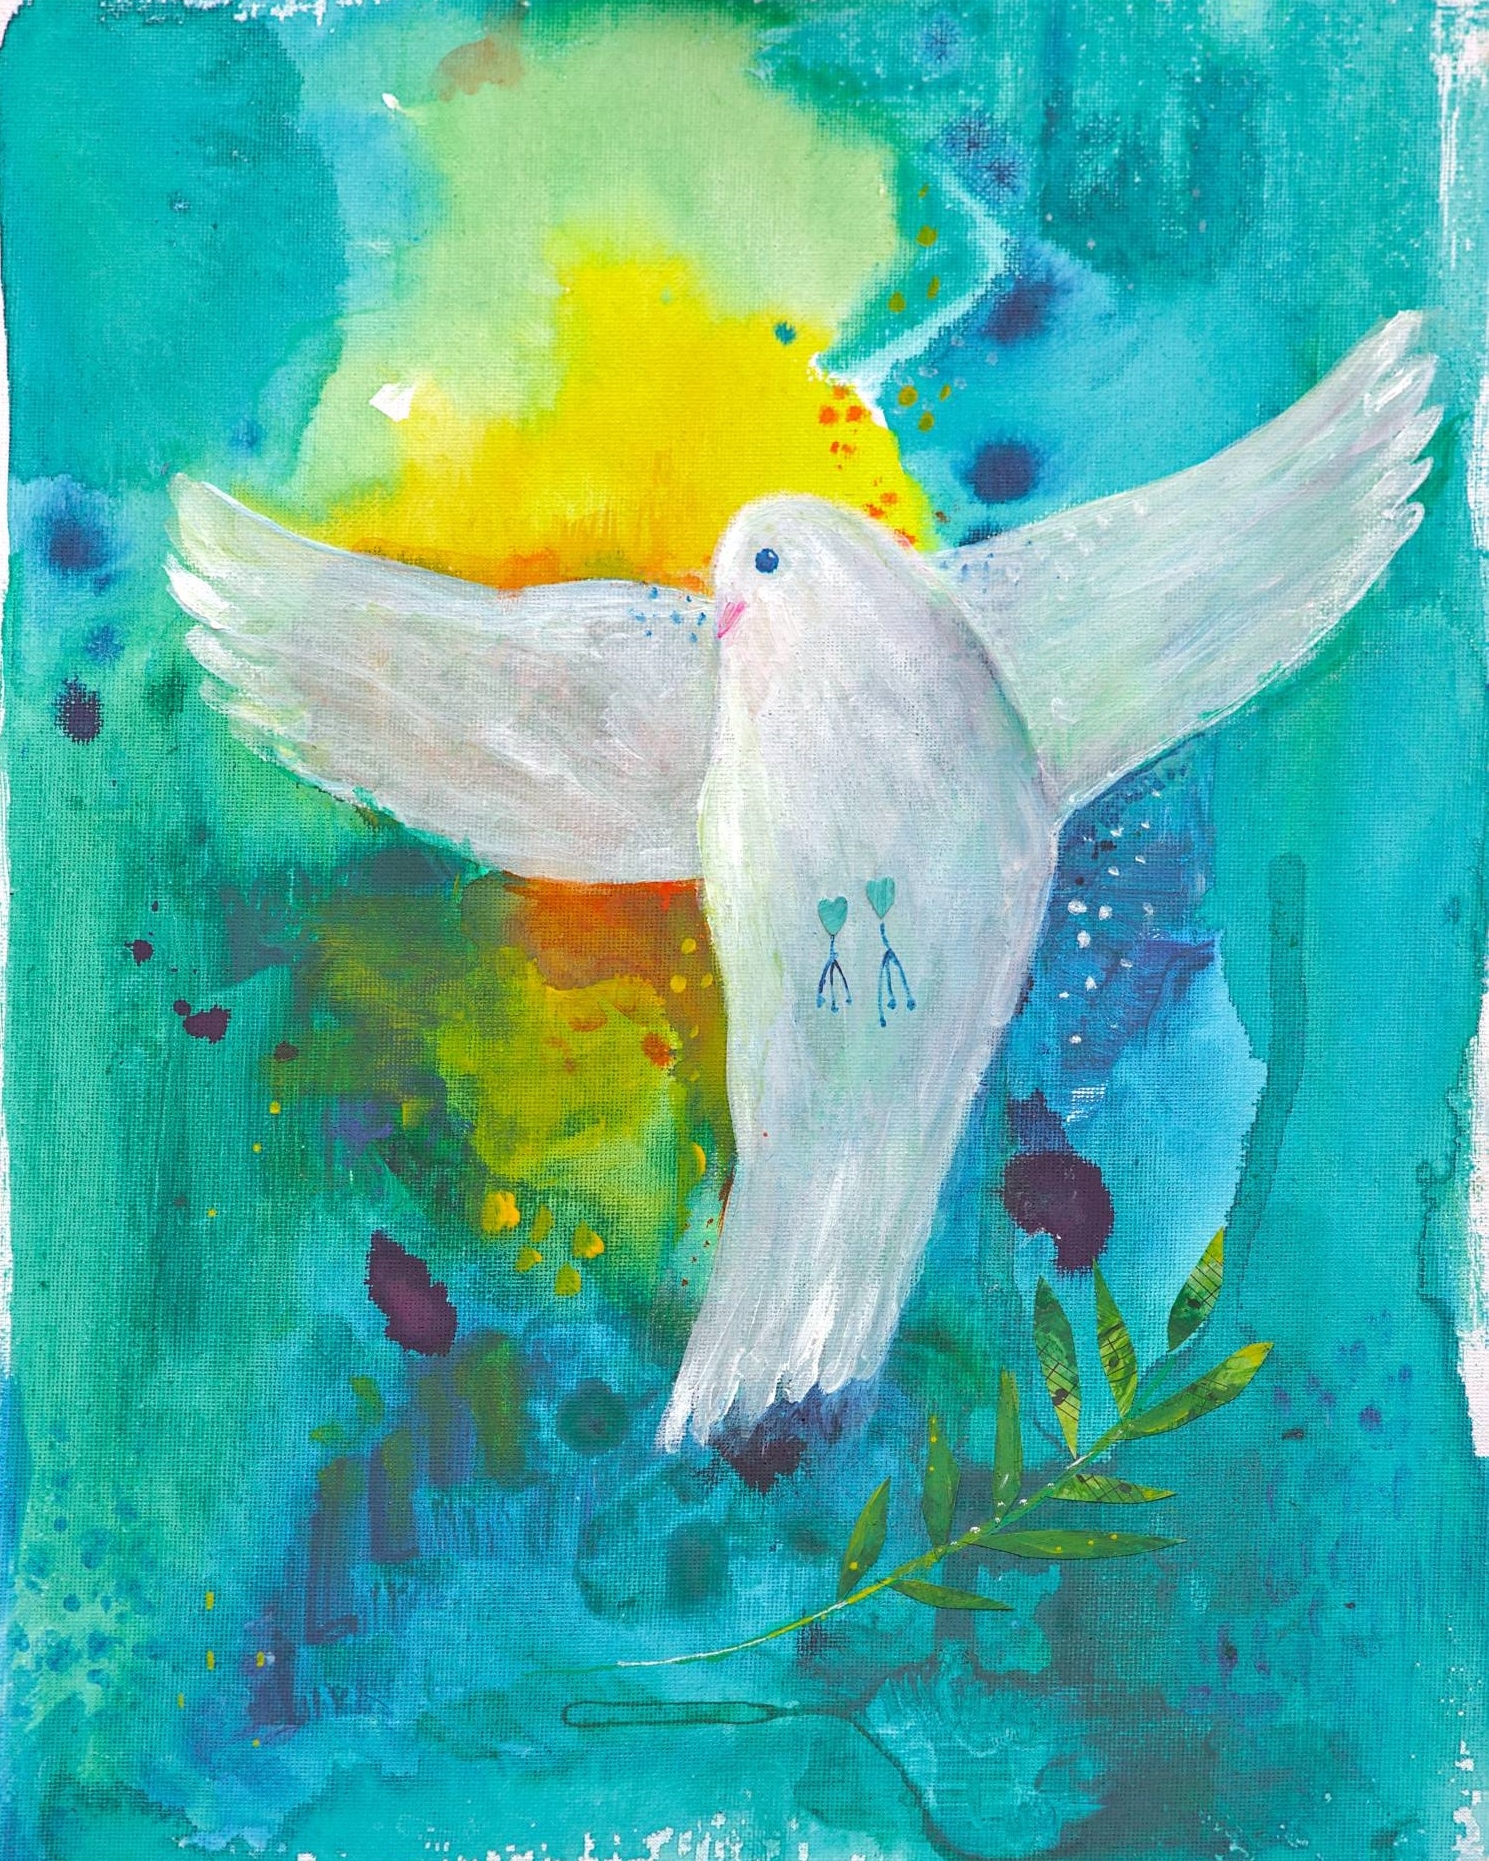 Spiritual Dove art print - whimsical dove painting with heart shaped hips As she takes flight she flies towards an abstract sun and above an abstract landscape of teals and greens with an olive branch below her.